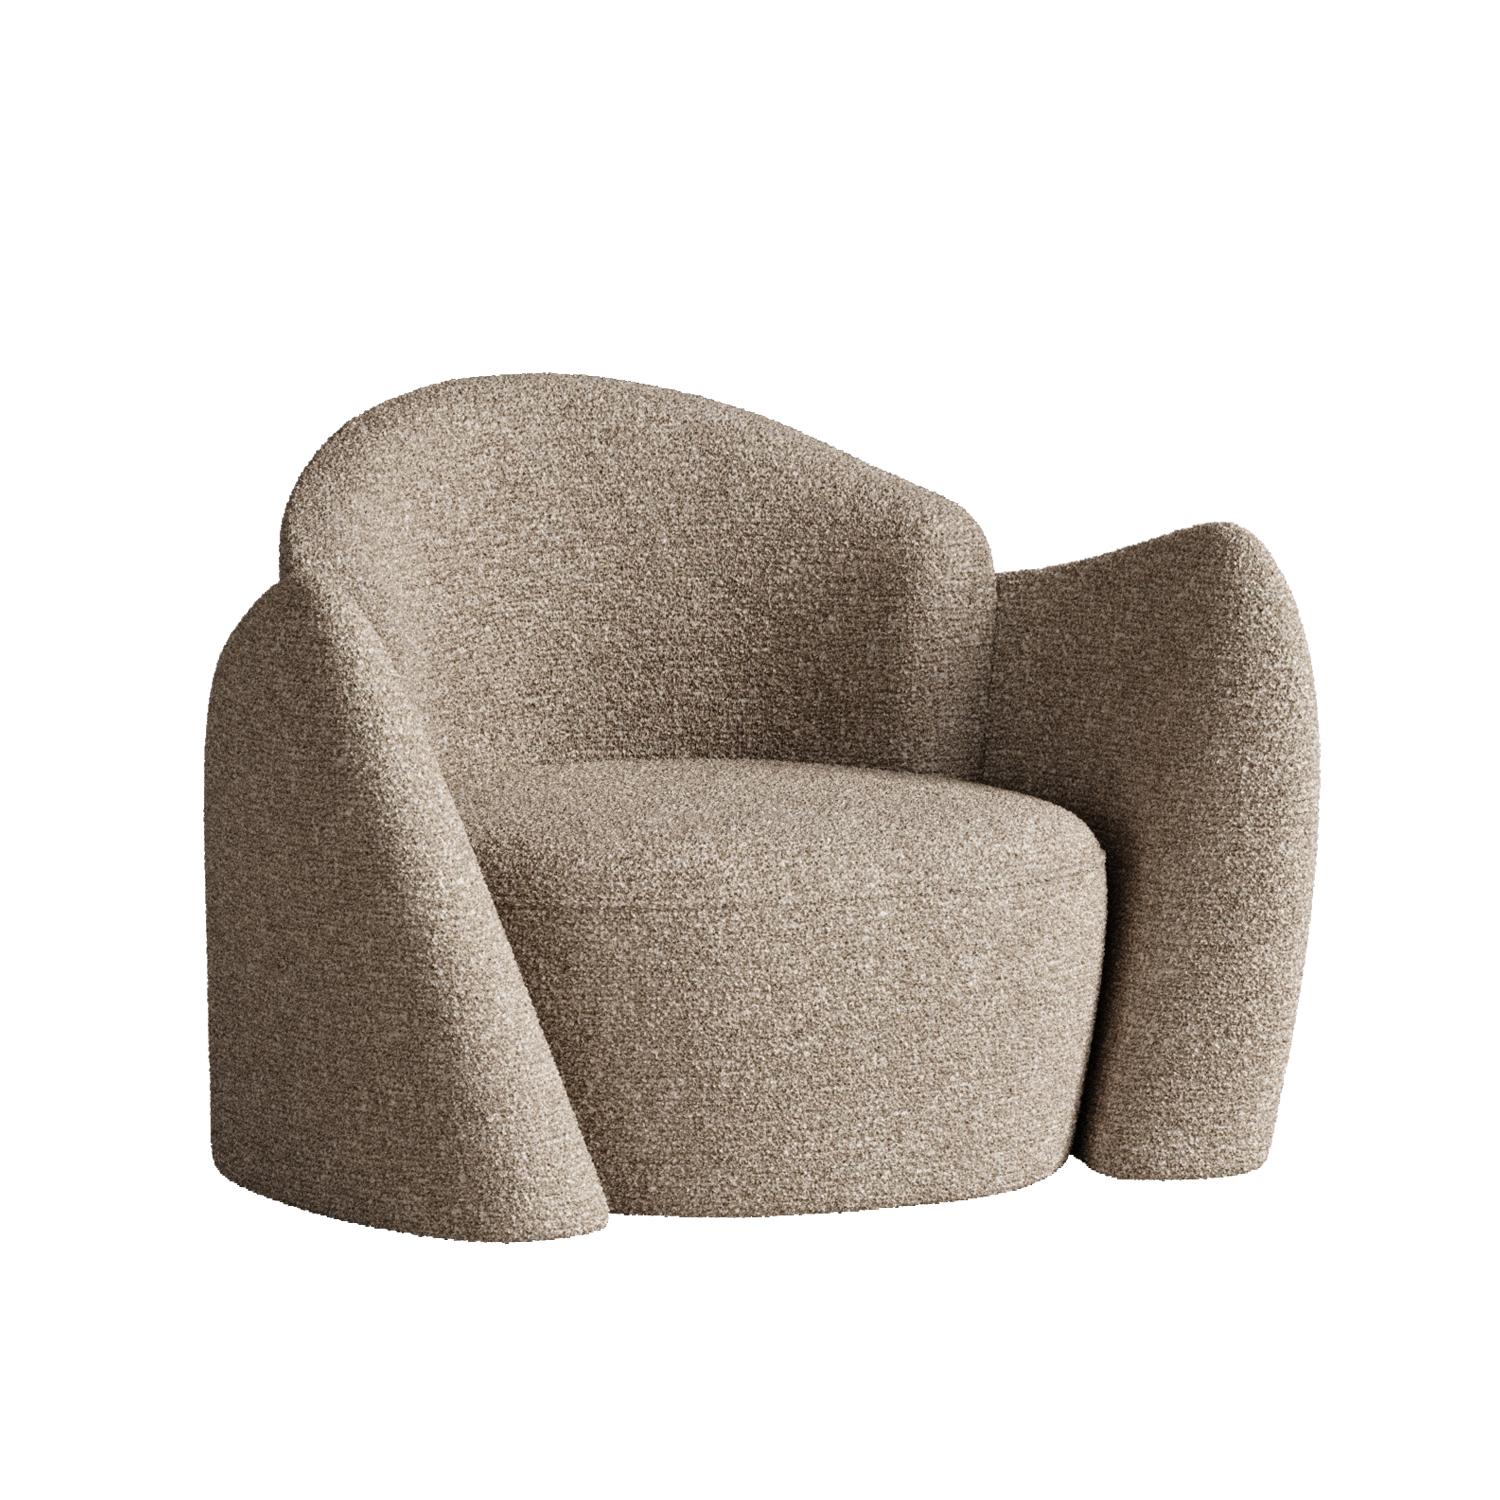 Beige Memory Chair by Plyus Design
Dimensions: D 90 x W 110 x H 80 cm
Materials:  Wood, HR foam, polyester wadding, fabric upholstery

“Memory” chair.
Collection 